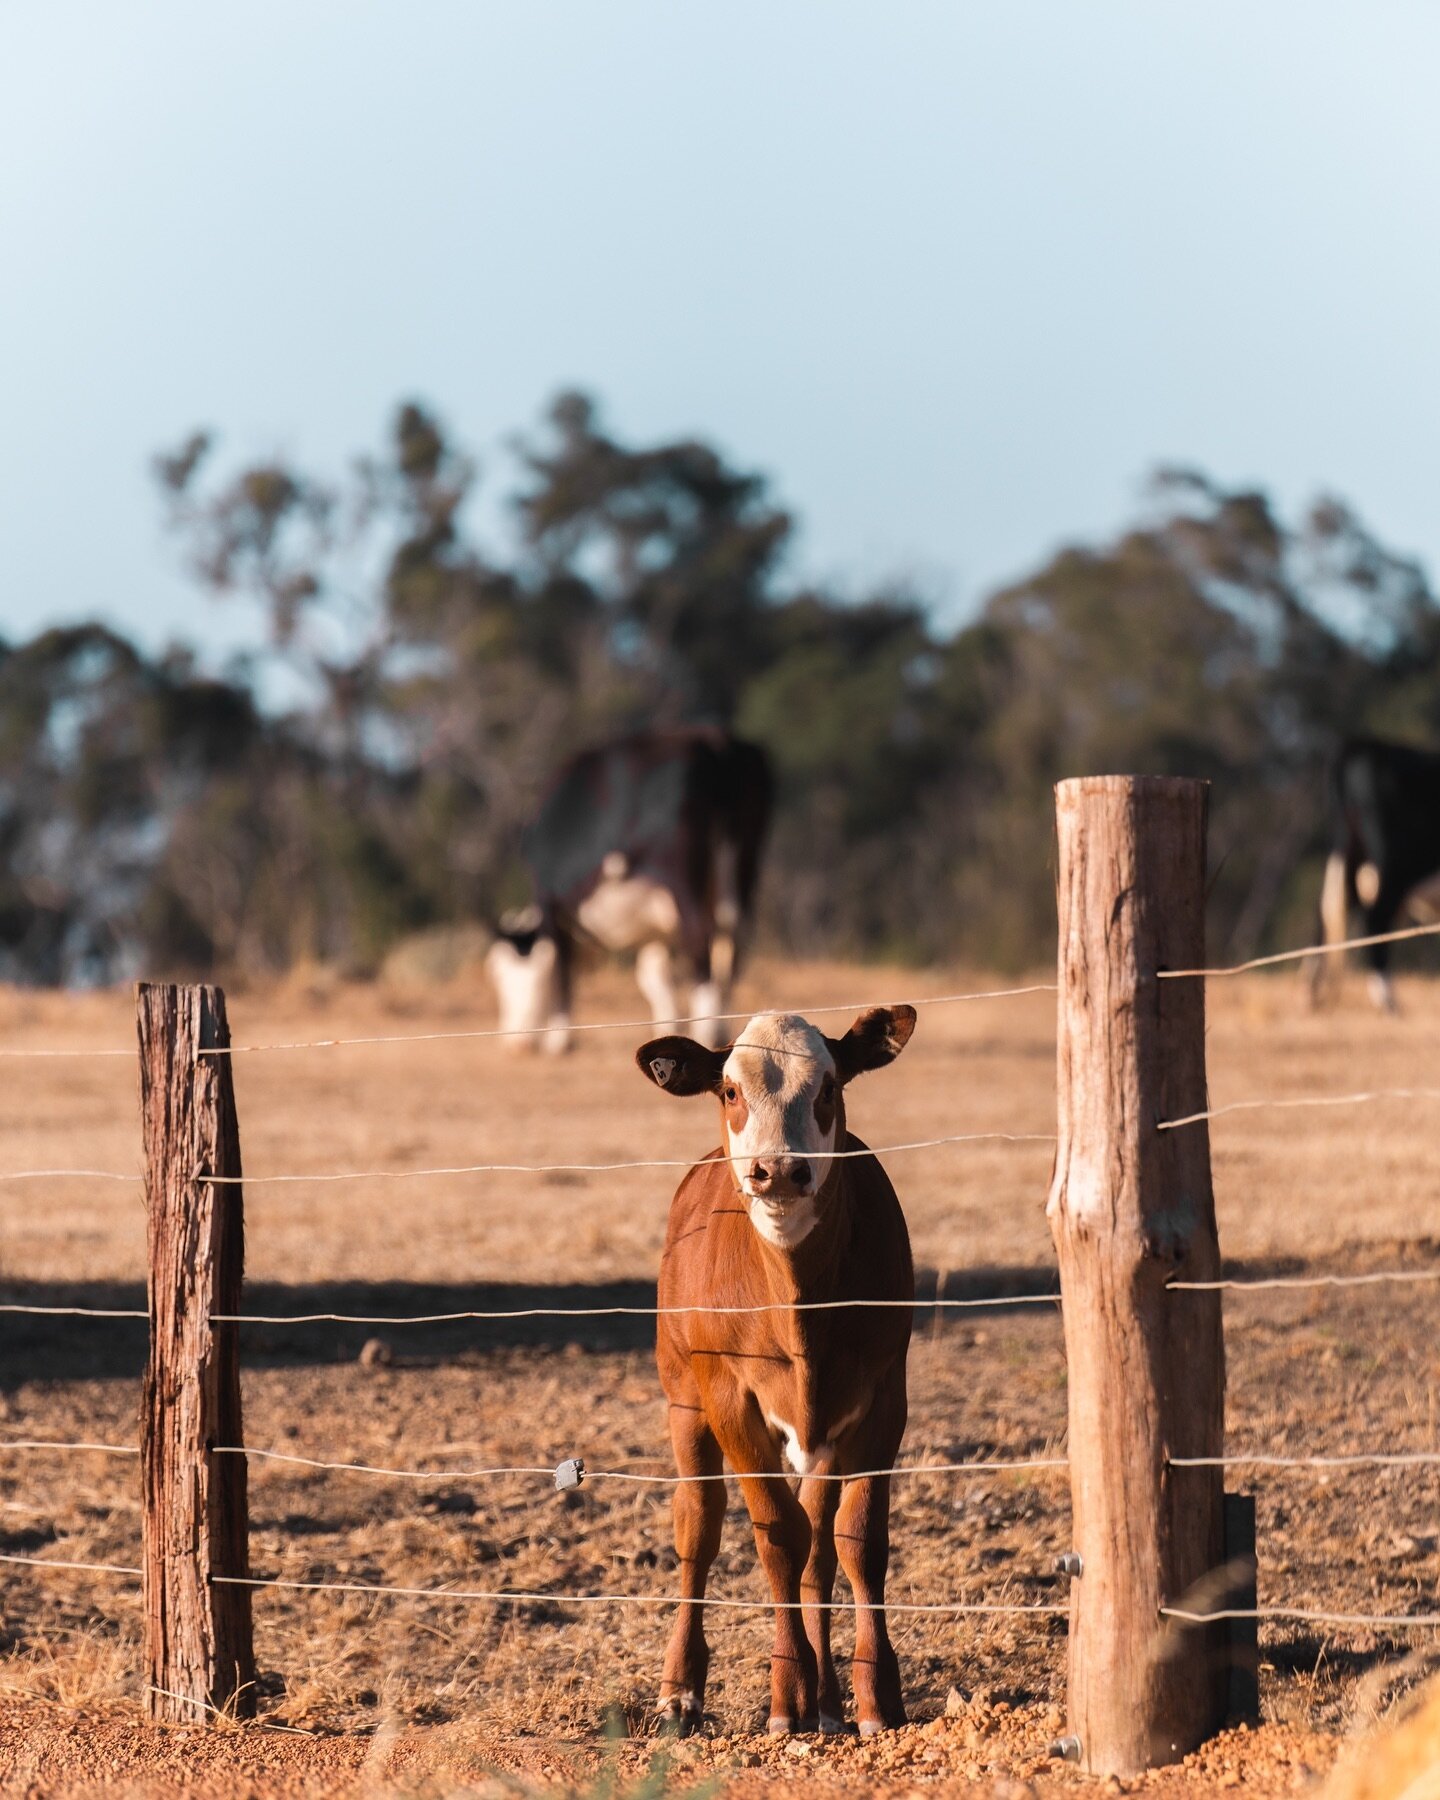 Have you heard of the @blackdogride ??

Every year this charity auctions off a heifer called Clementine to raise money for suicide prevention.

We currently have 7 Clementines roaming the fields on our property. This little girl is Clementine number 